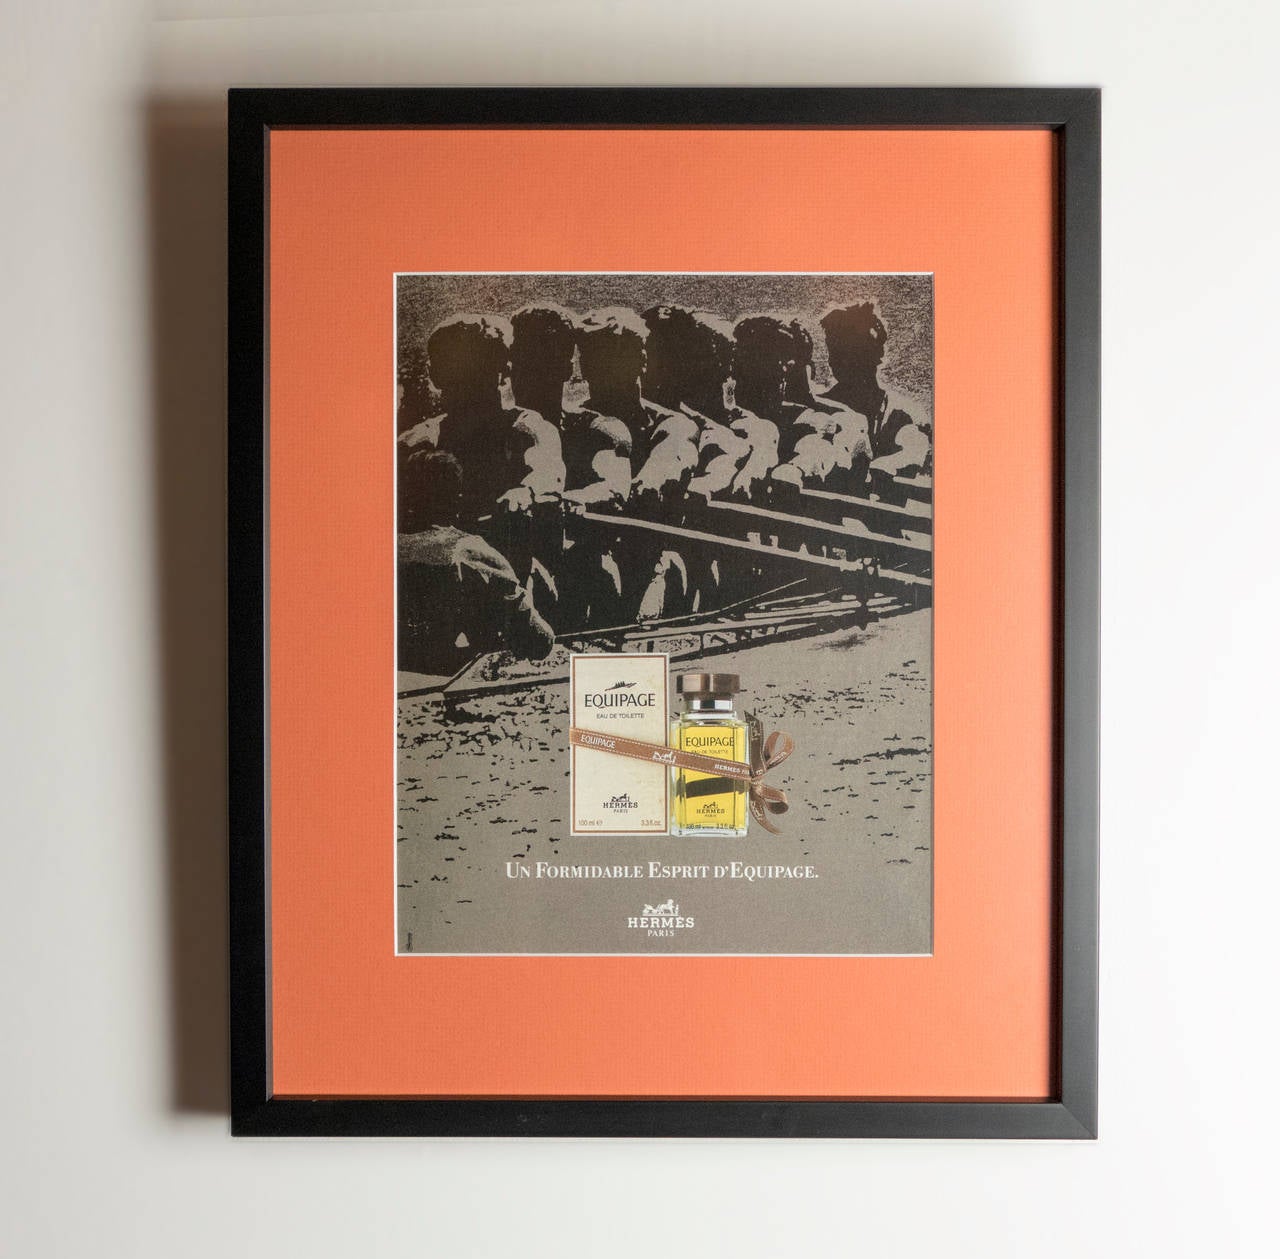 Original set of six Hermès advertisements from the 1920s to the 1960s
Newly Framed with a orange matte and black wooden frames.  
Sold as a set of six only.  These prints are located in our space in the 1STDIBS@NYDC showroom in NYC.